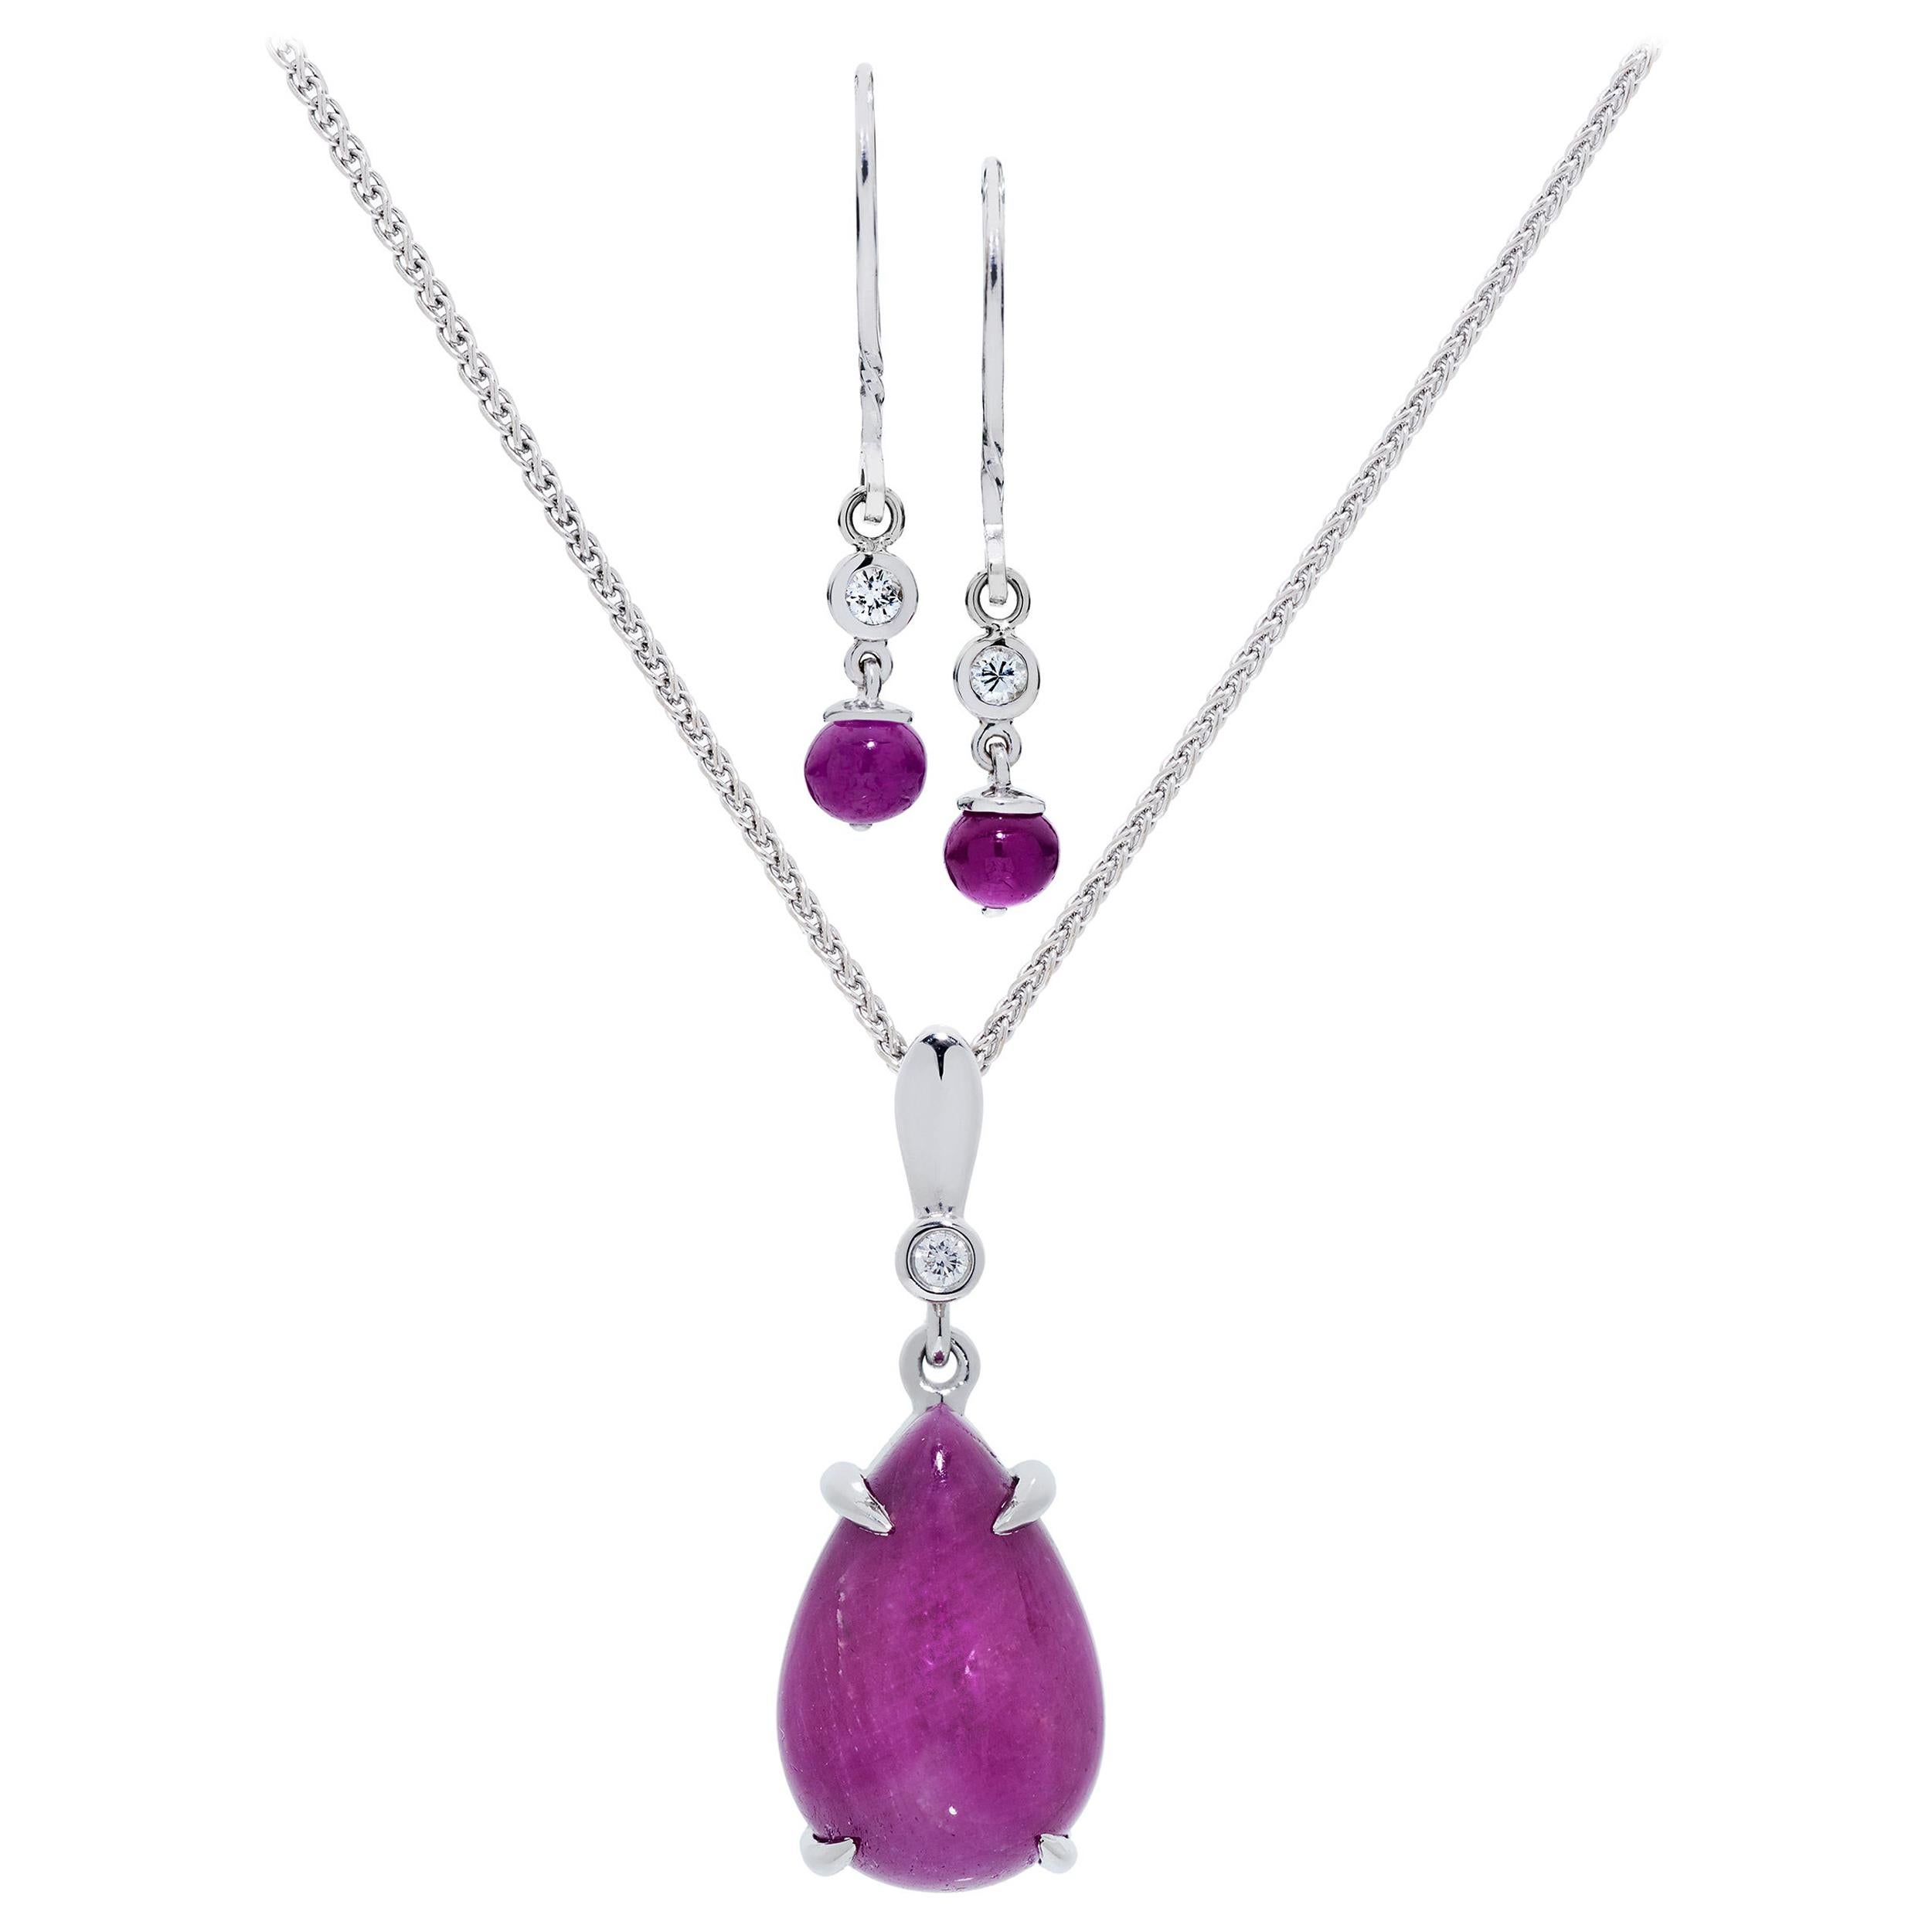 7.91 Carats Pear-Shaped Ruby Cabochon in Platinum Pendant and Earring Set